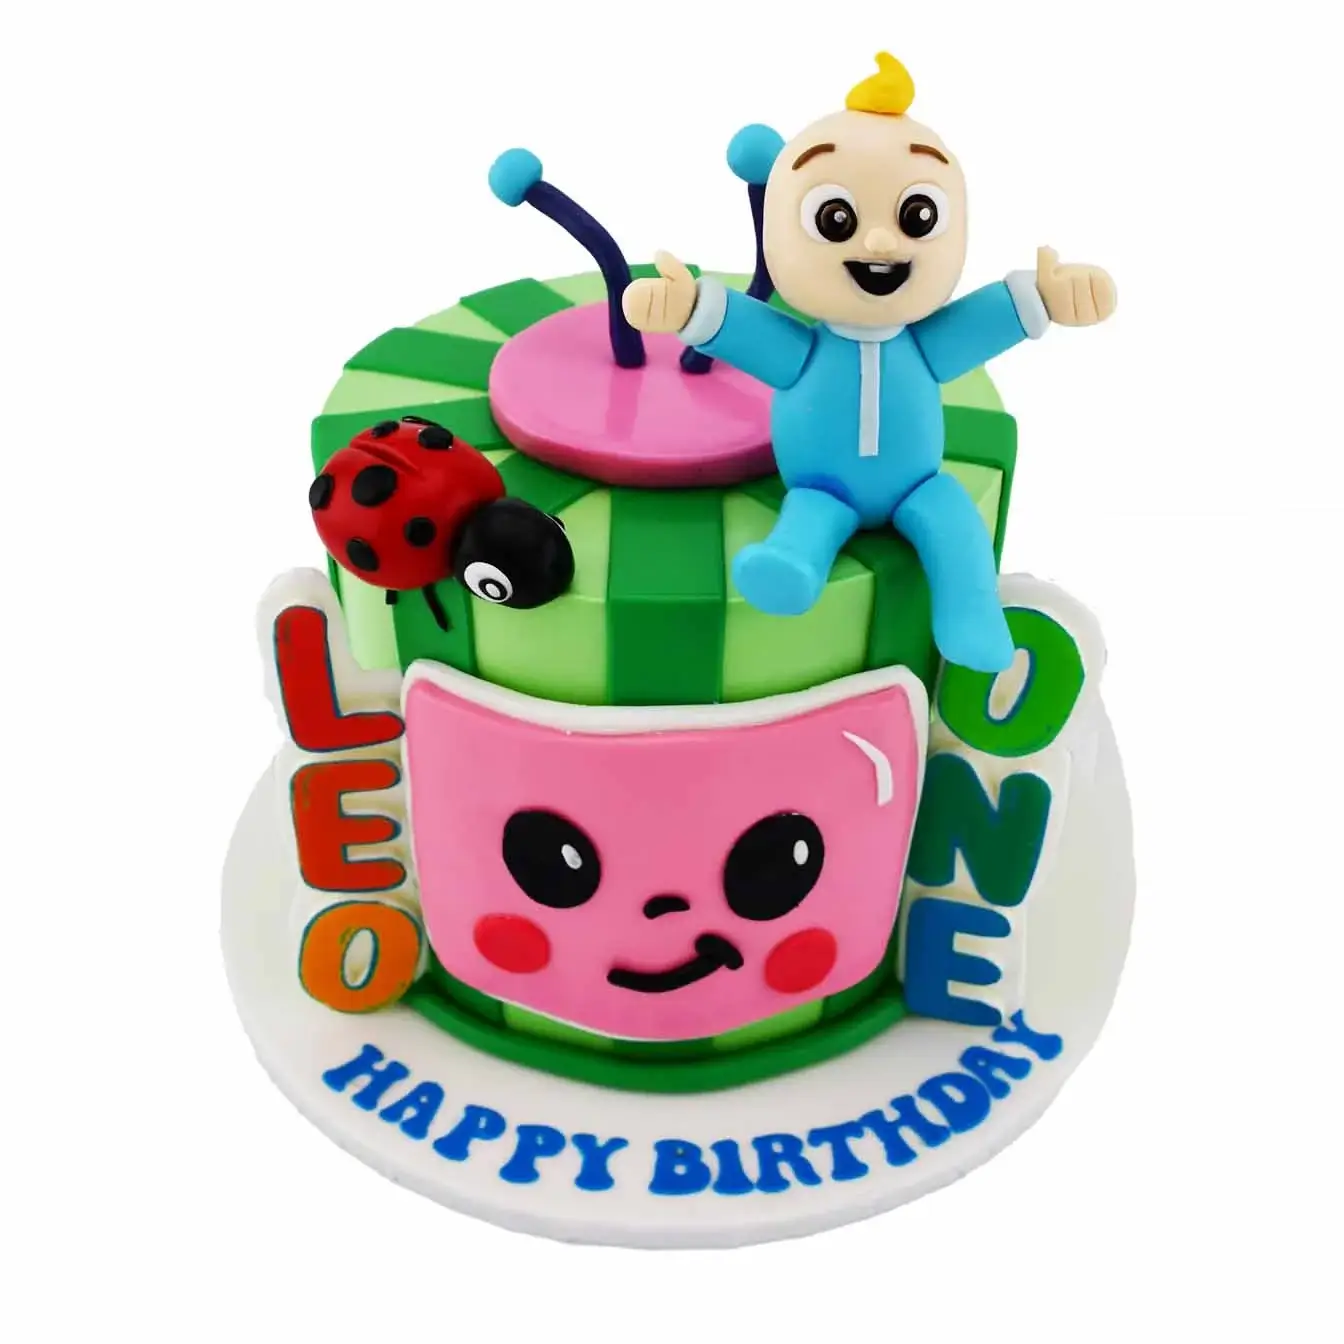 Coco Melon Cake with vibrant colors and adorable characters, perfect for a Coco Melon-themed party or celebration